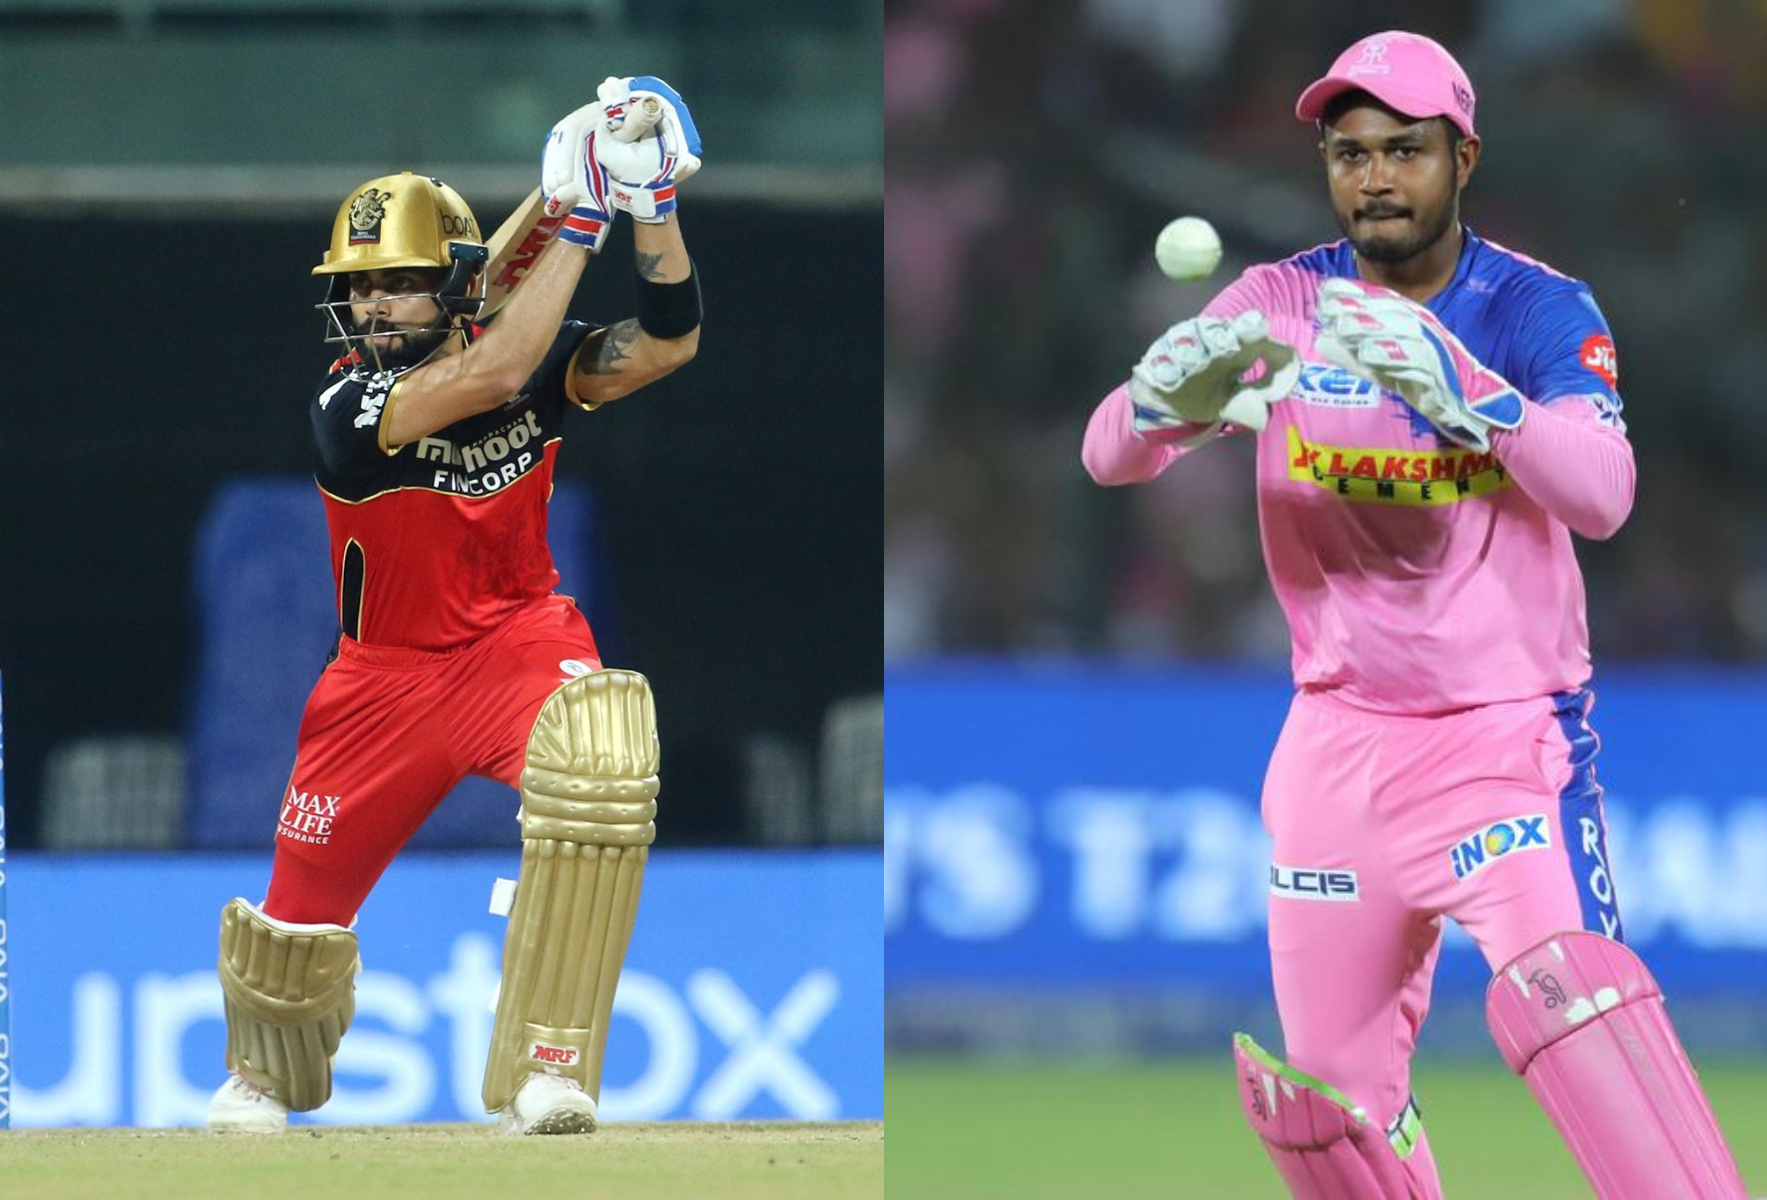 RCB are table toppers with 3 wins in 3 matches, while RR are placed on 6th spot | IPL-BCCI